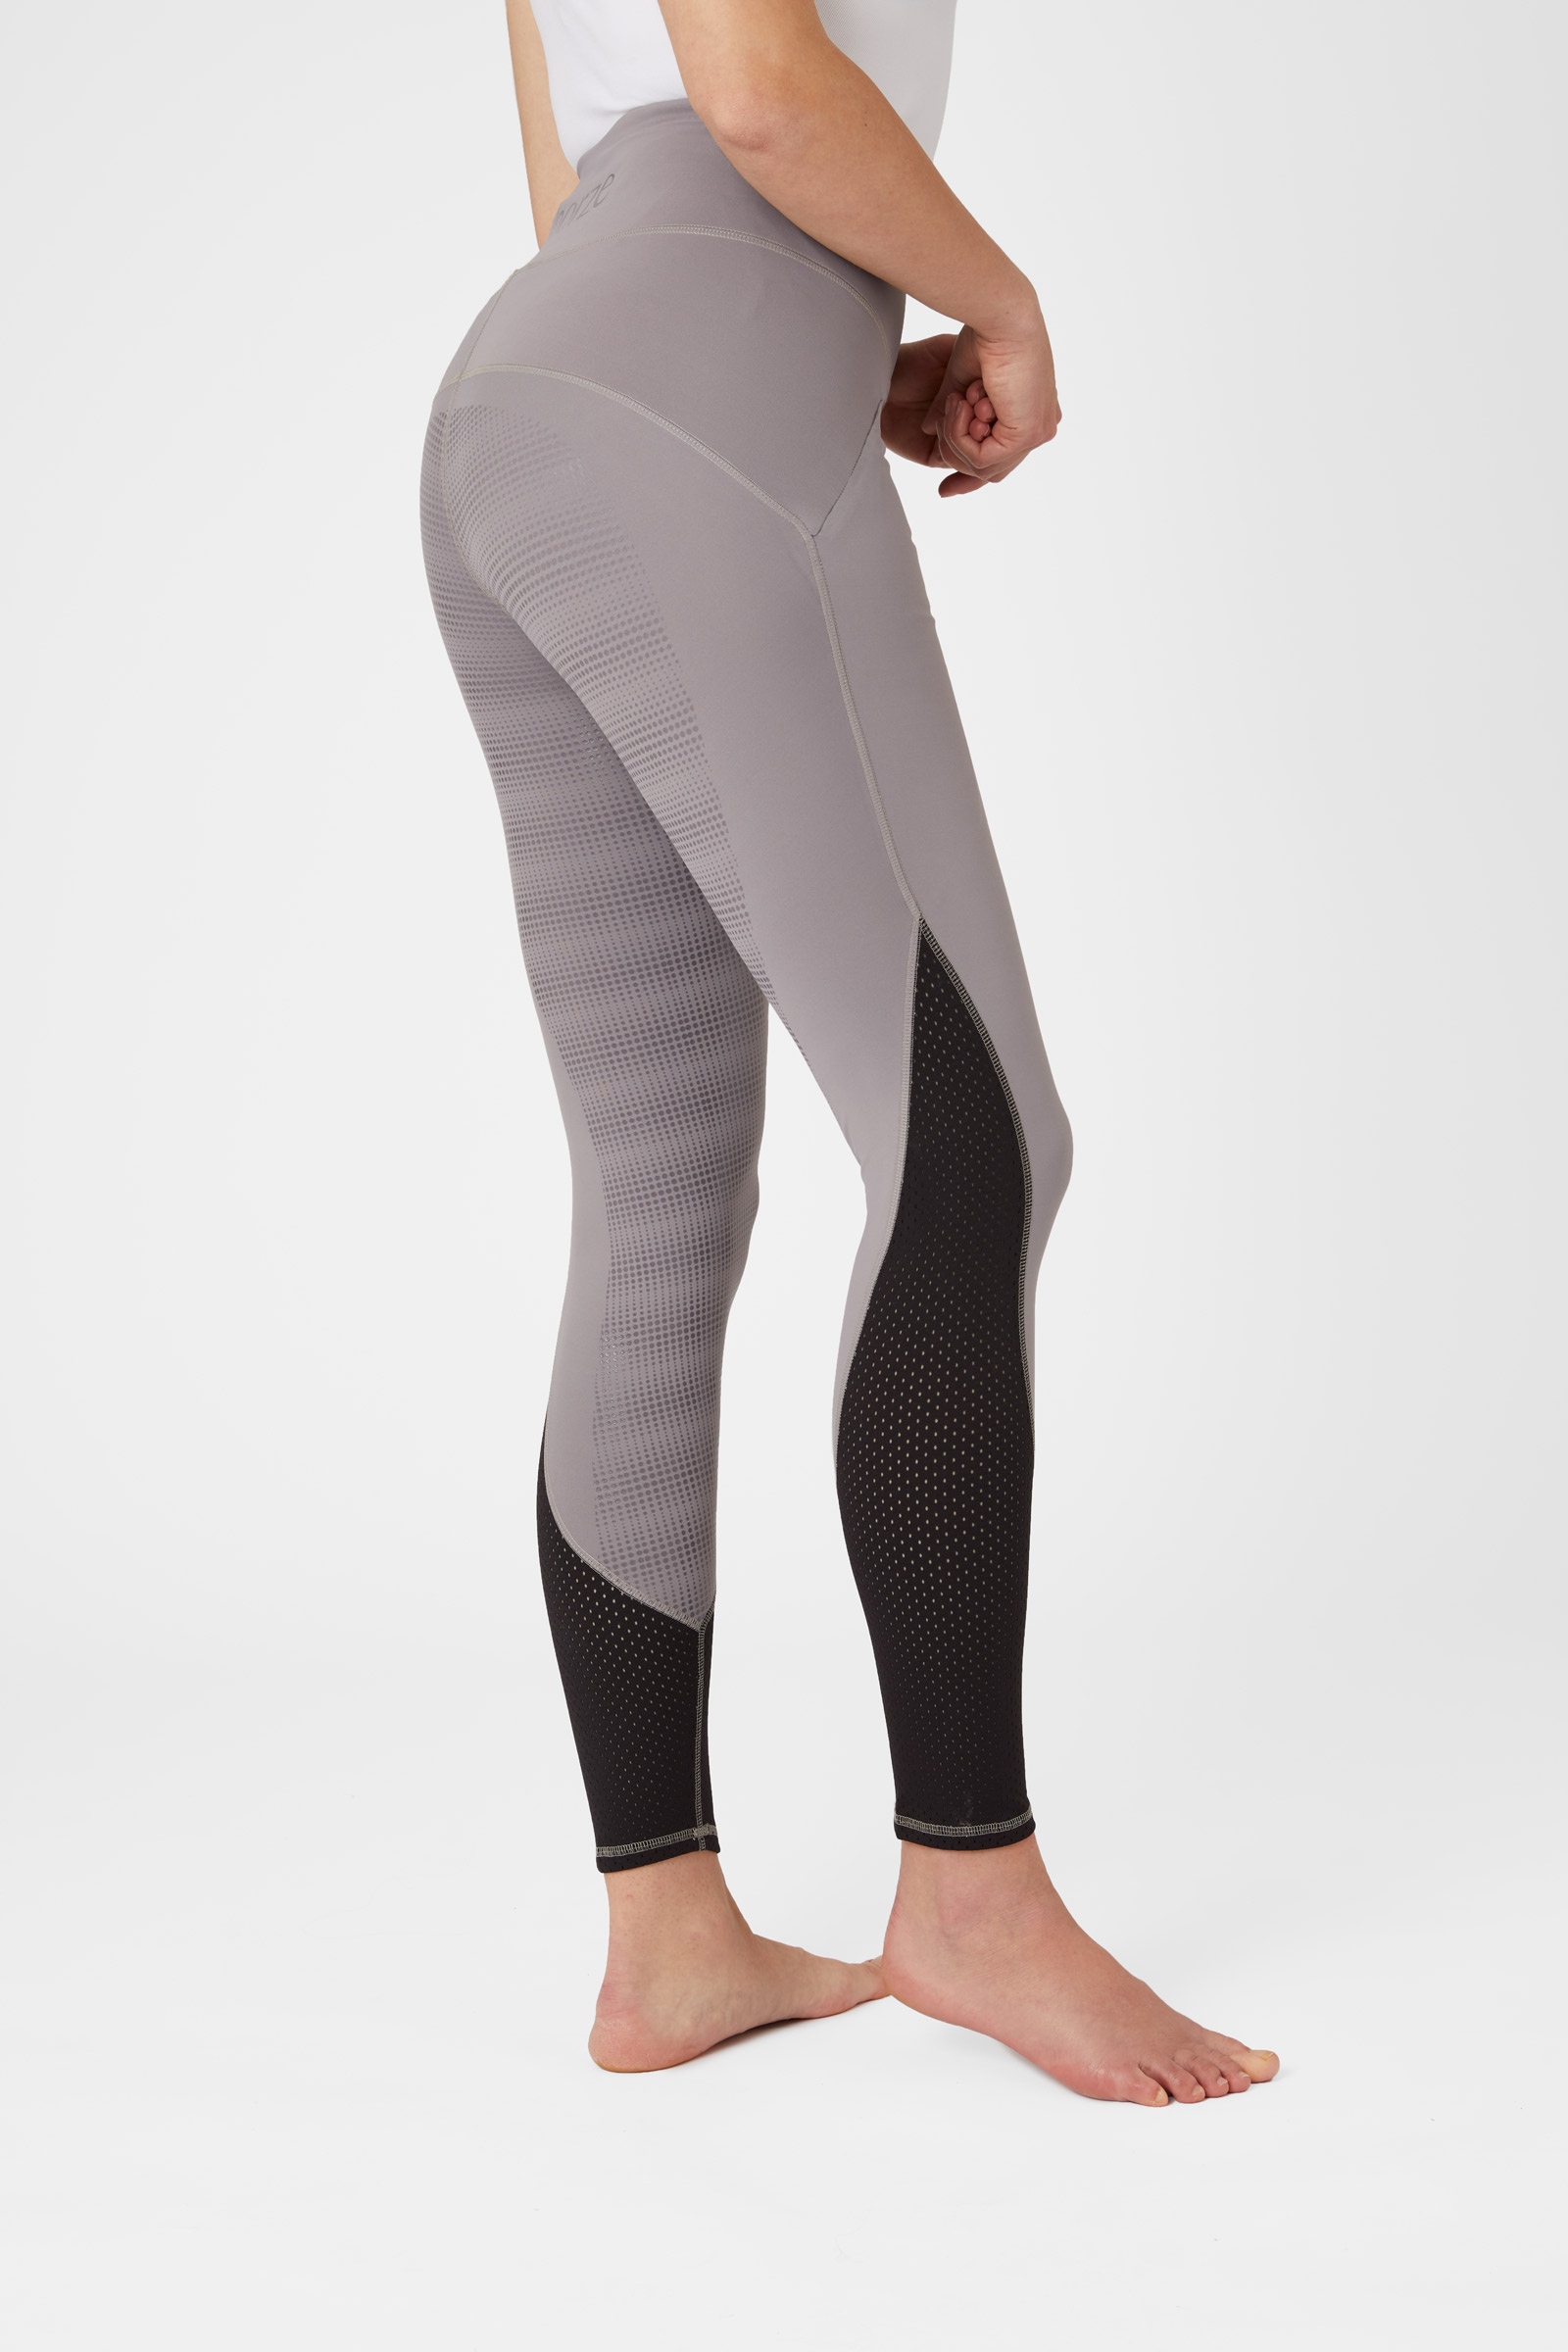 Legacy Ladies Riding Tights Silicon - My Country Store